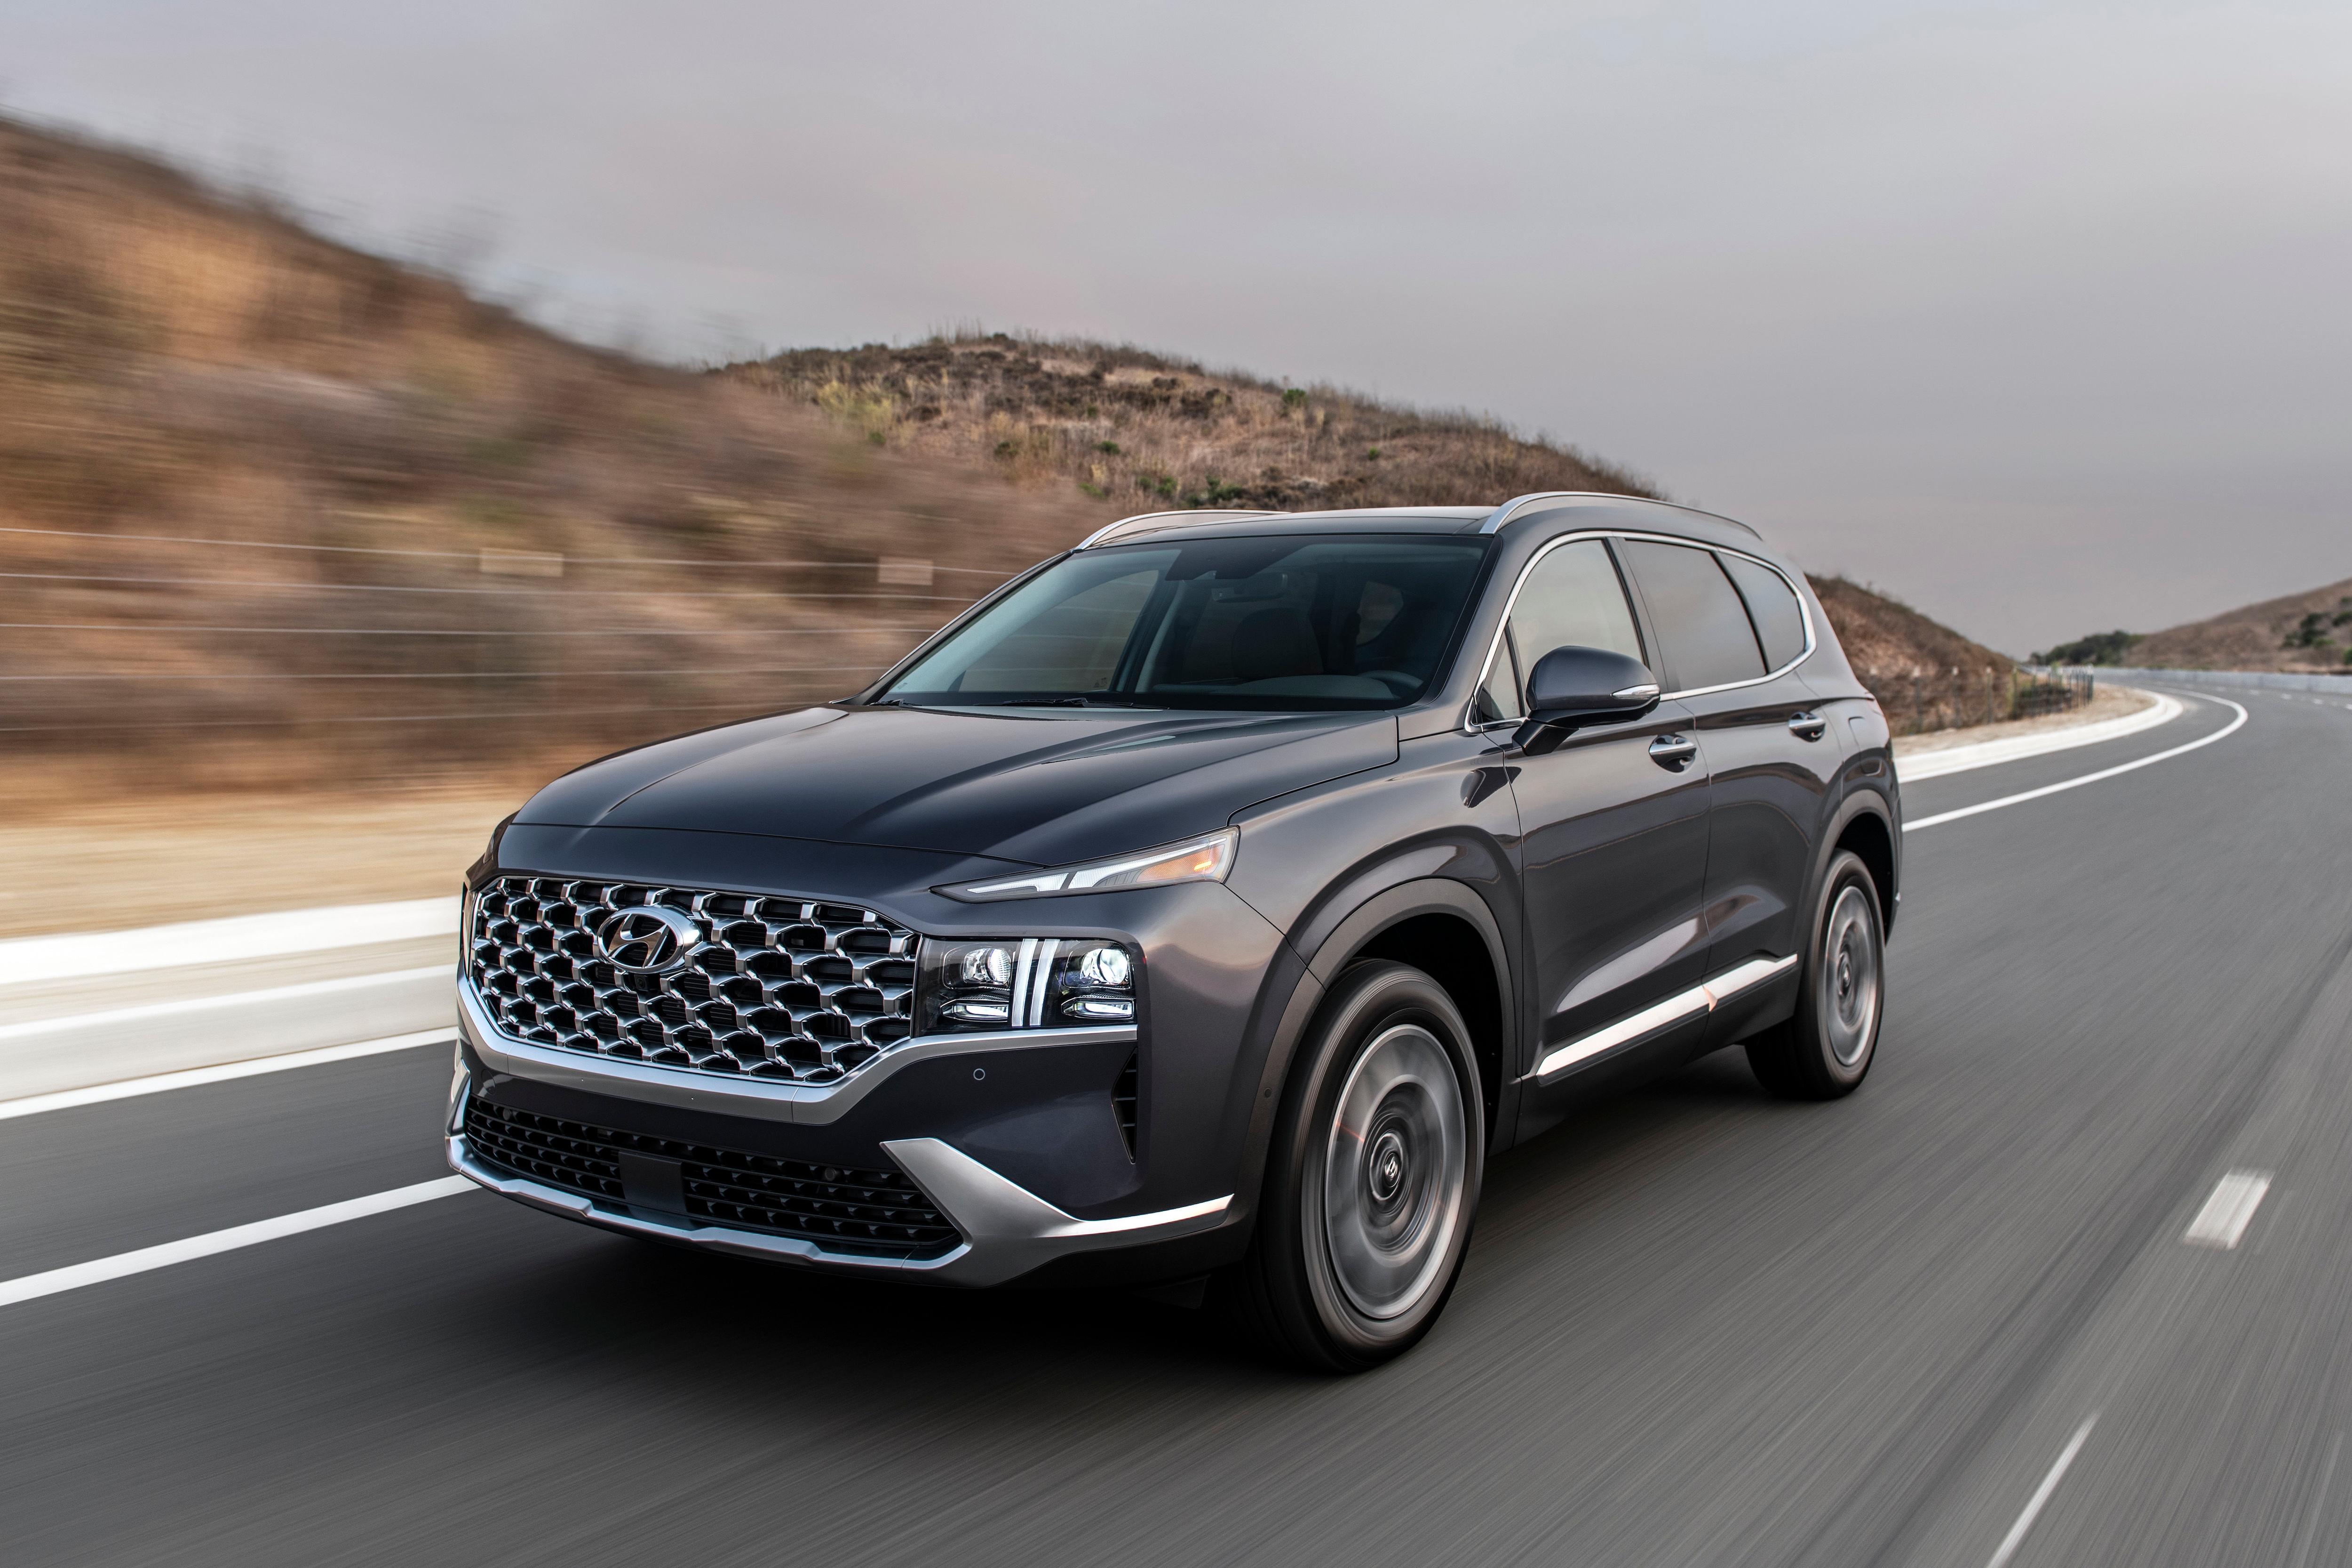 2021 Hyundai Santa Fe revealed, gets significant design updates and ...